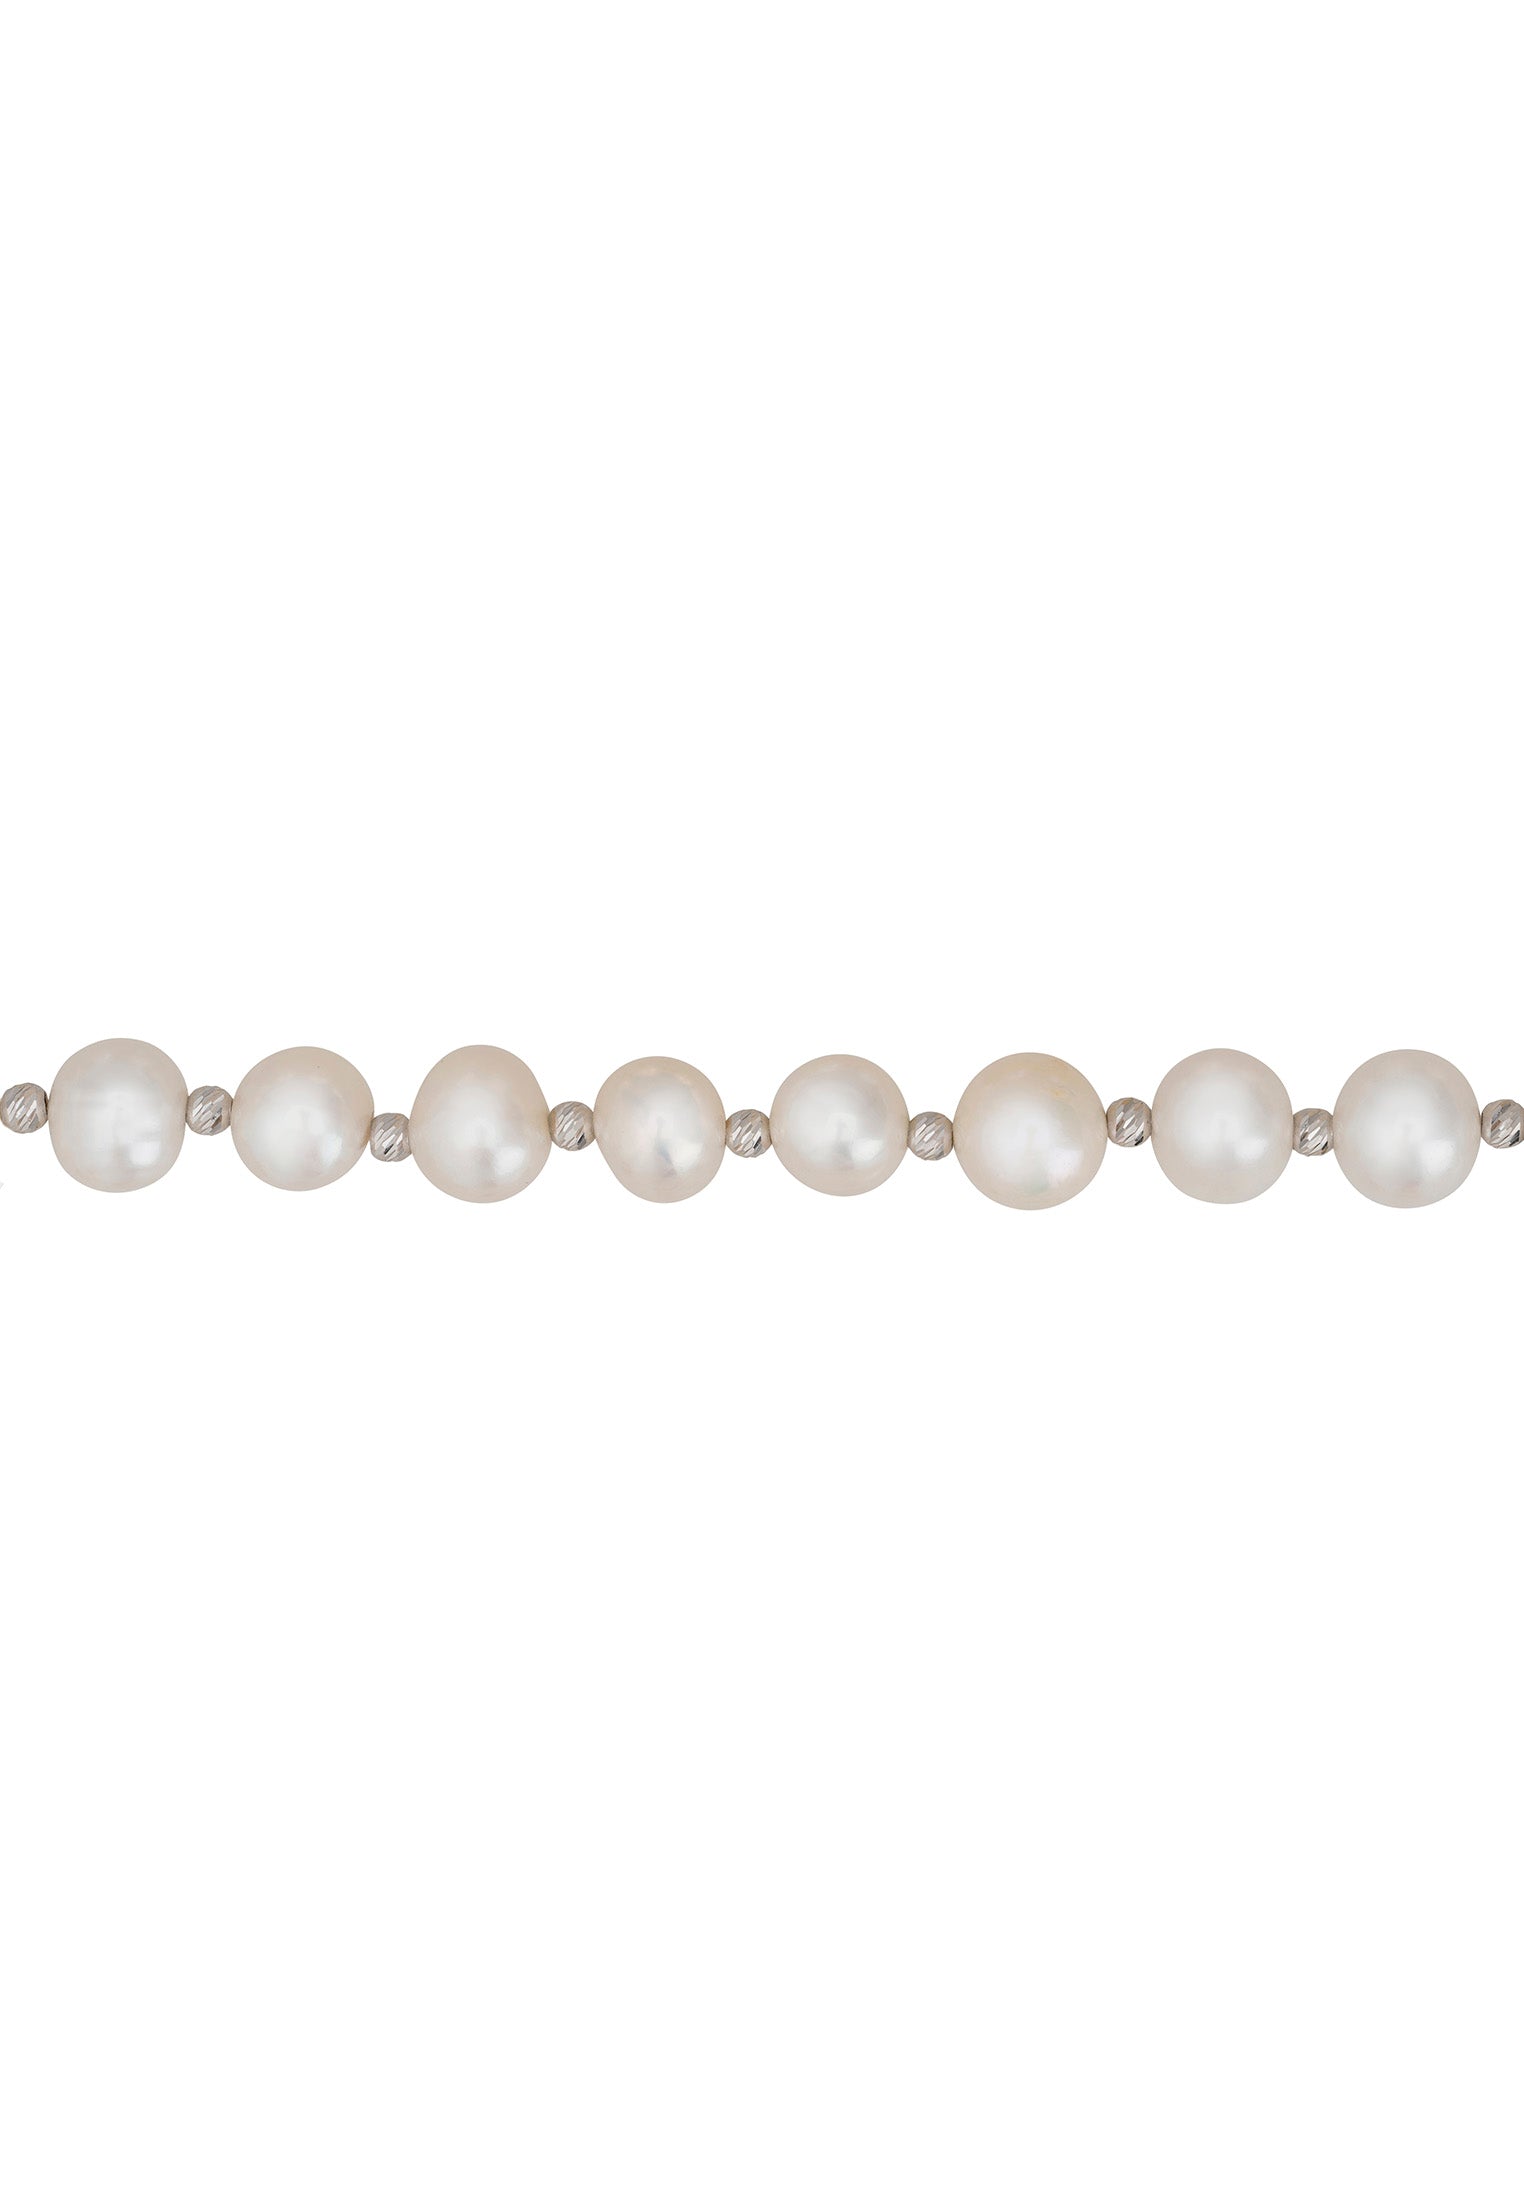 Solid 14K White Gold Classic Natural Pearl Bracelet